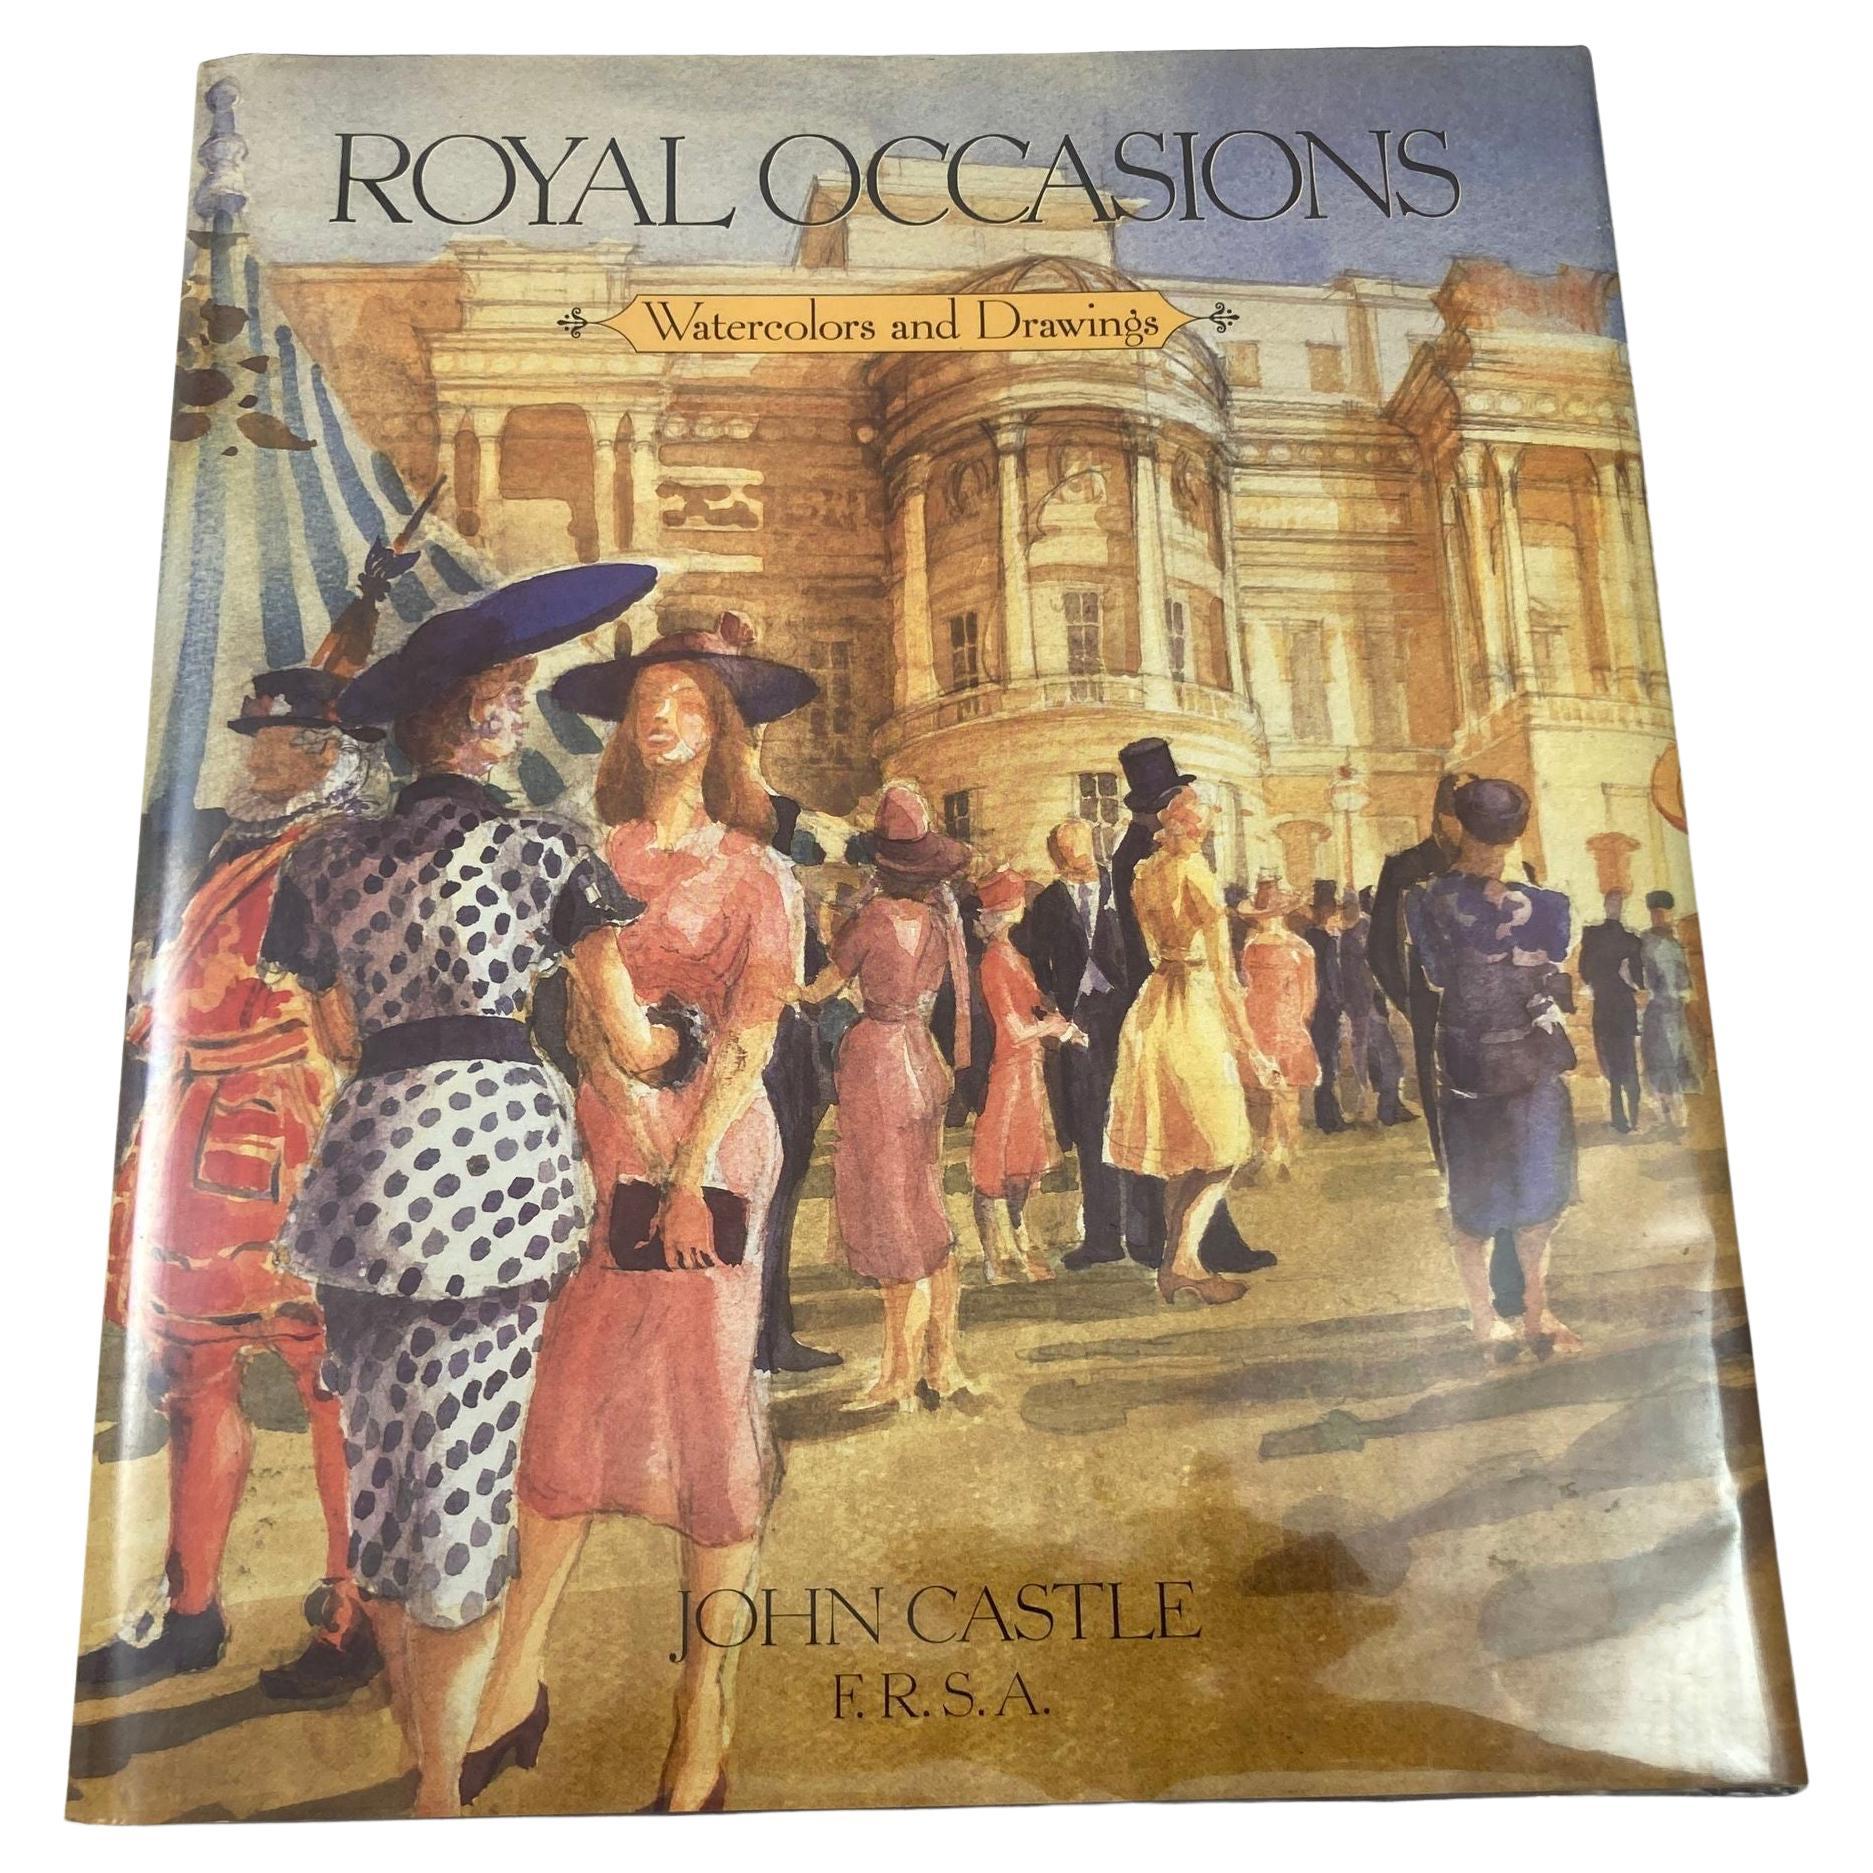 Royal Occasions: Watercolors and Drawings by John Castle Hardcover Book For Sale